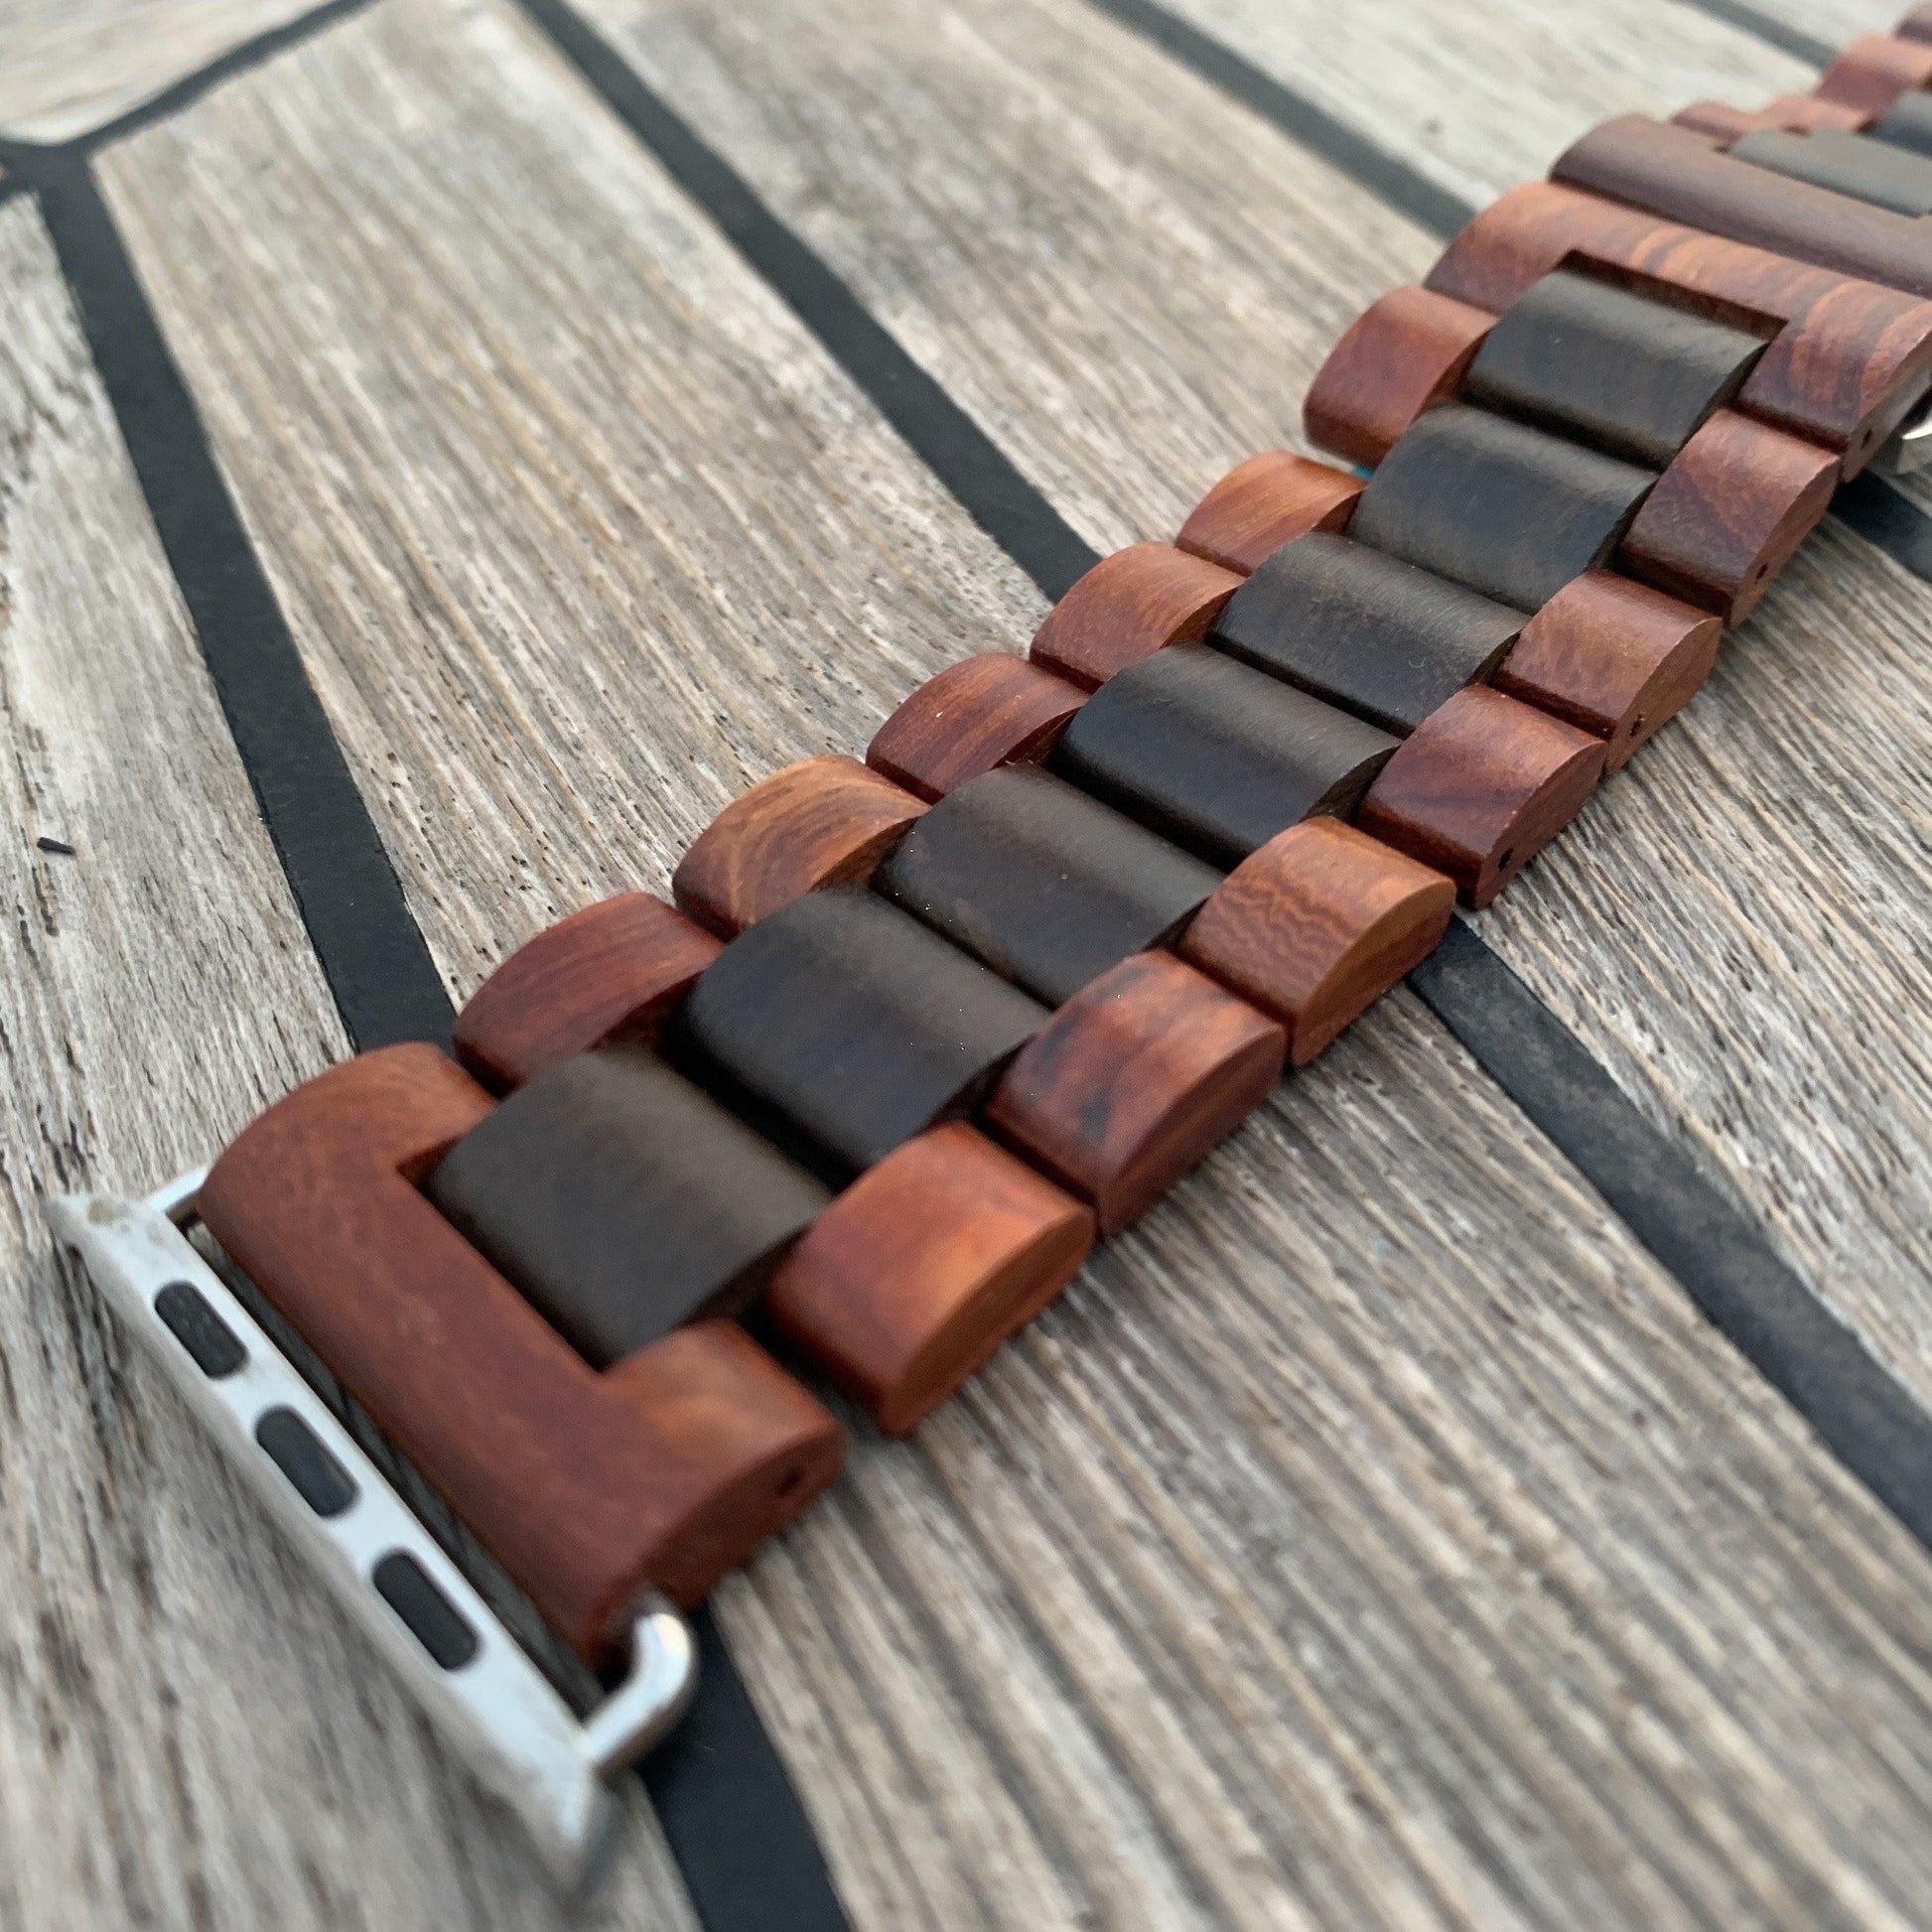 Rose Ebony Wooden Band for Apple Watch 🌳 Natural Wood. ♻️ Eco-friendly. ✈️ Free Worldwide Shipping. 🎁 Perfect Gift.